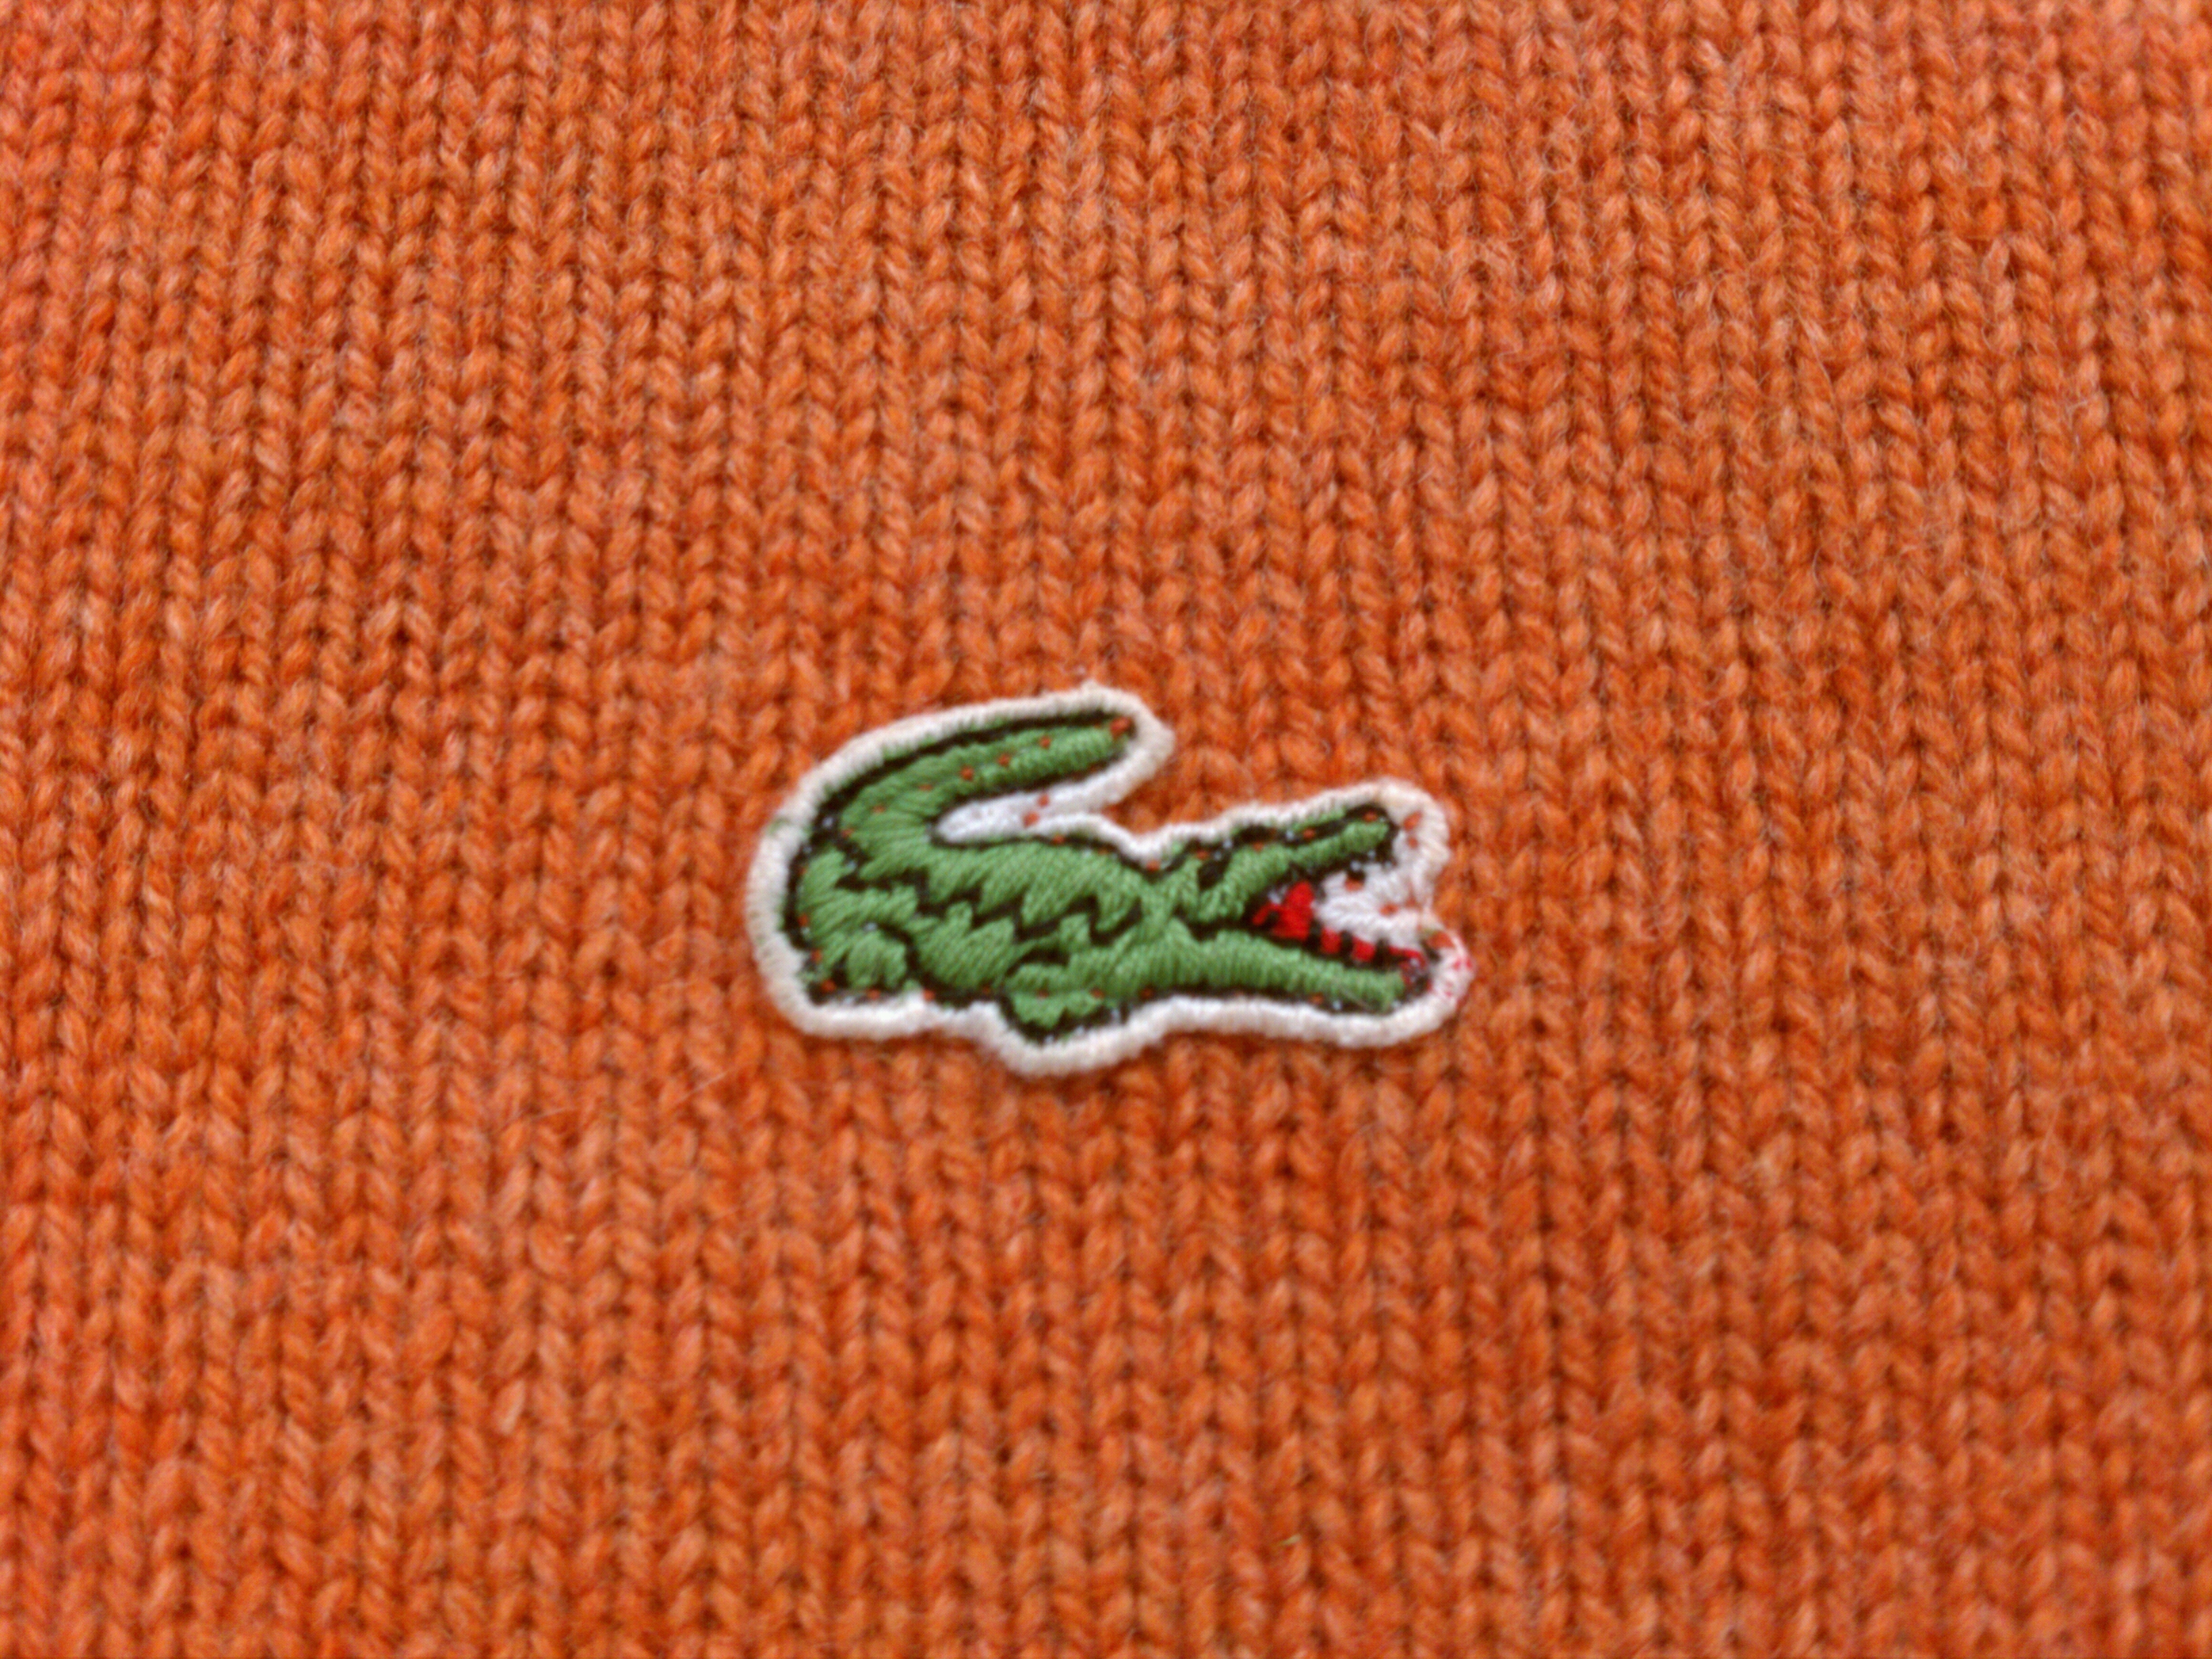 what clothing company has an alligator logo